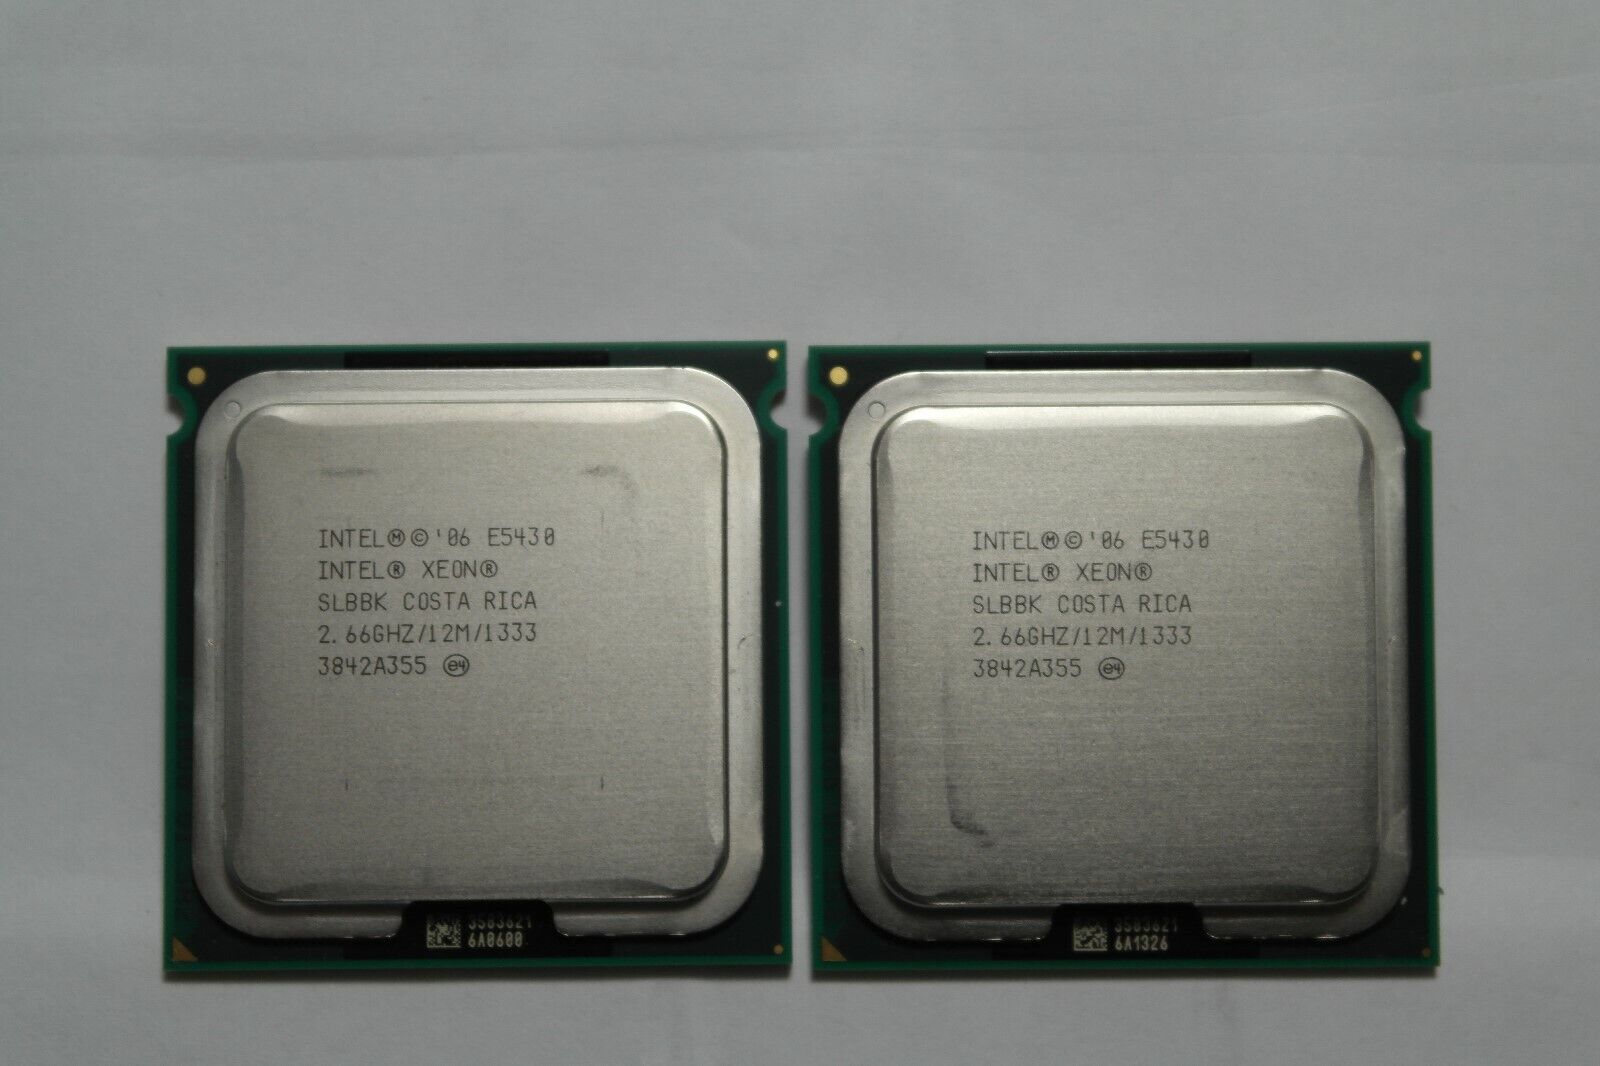 Matched Pair of Intel Xeon E5430 2.66GHz Quad-Core SLBBK Processor w/Grease